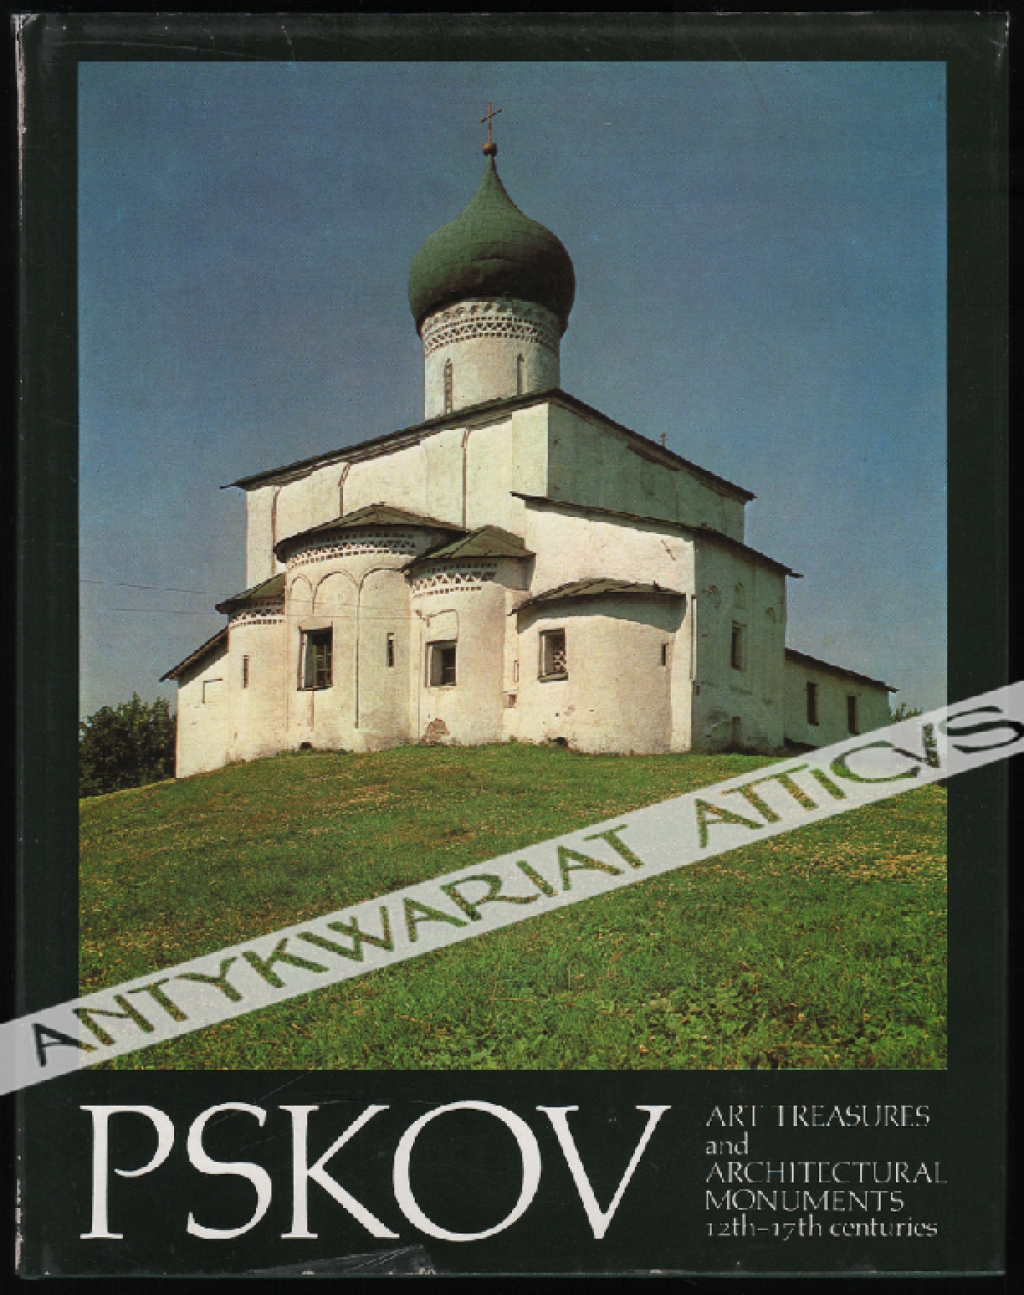 Pskov. Art treasures and architectural monuments 12th - 17th centuries